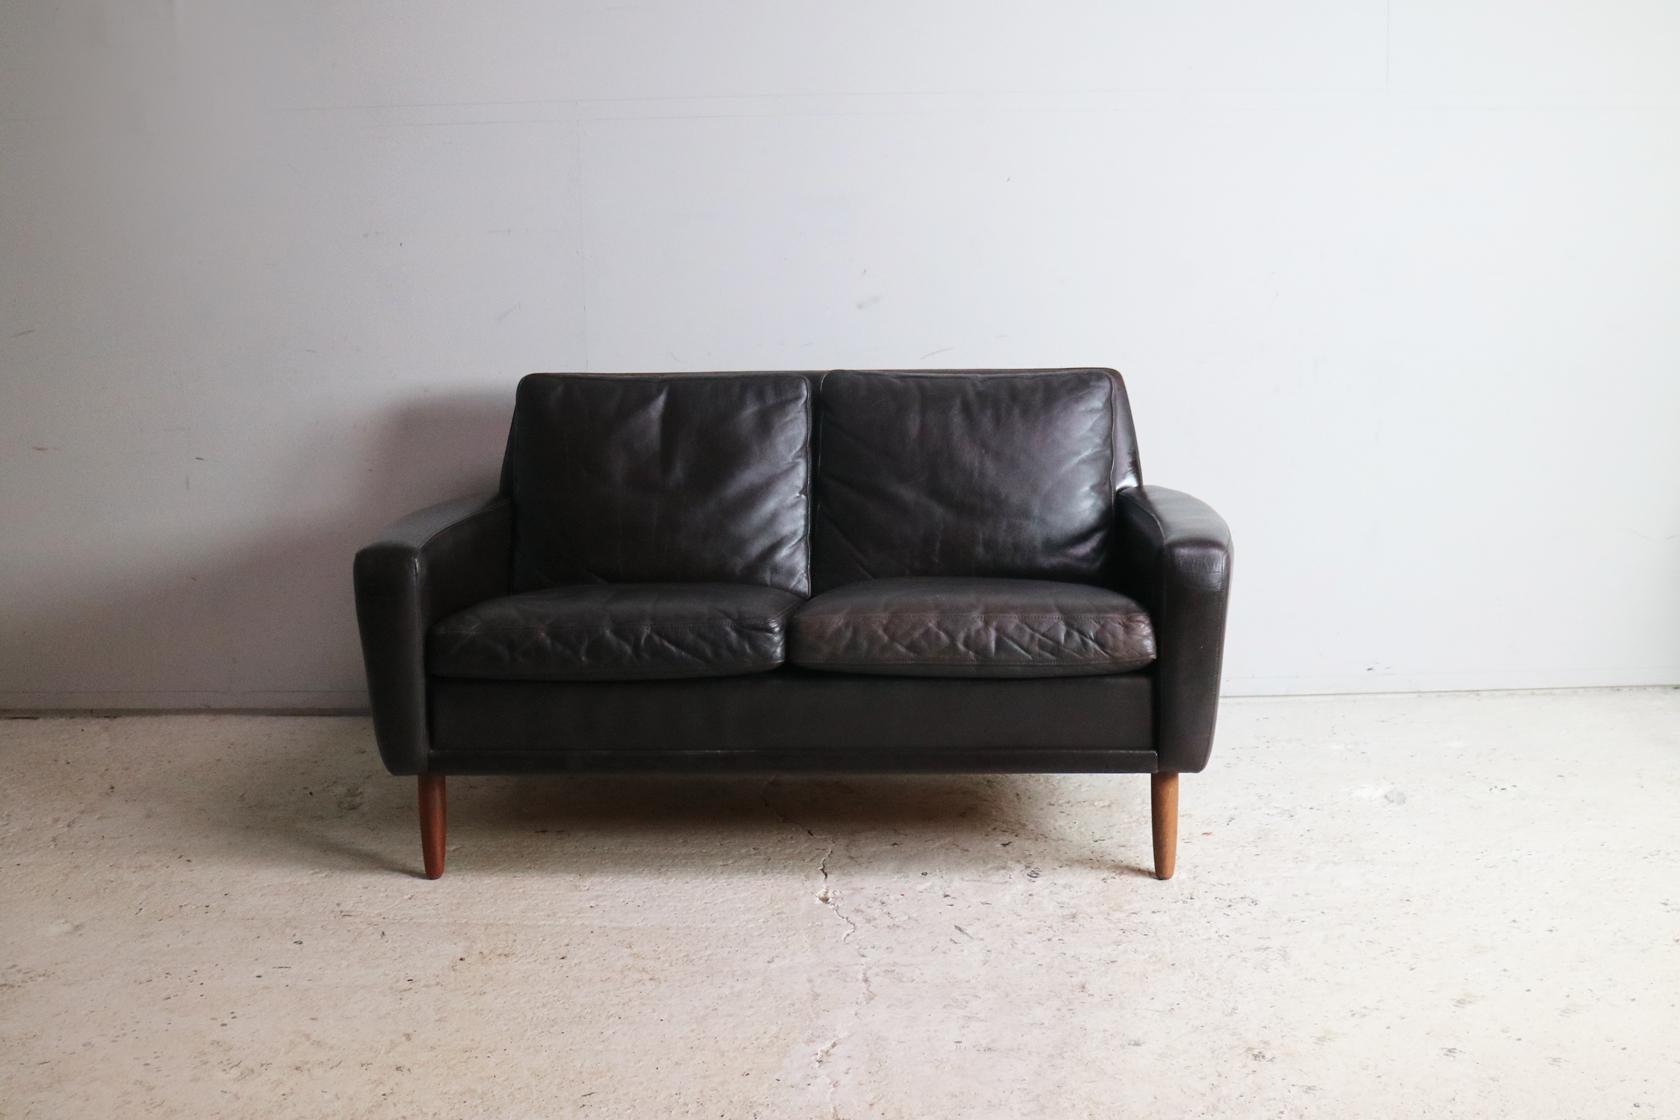 A lovely Danish Mid-Century Modern sofa with a great shape with subtly curved arms. Upholstered in the original very dark brown (virtually black) leather with turned teak feet.
  